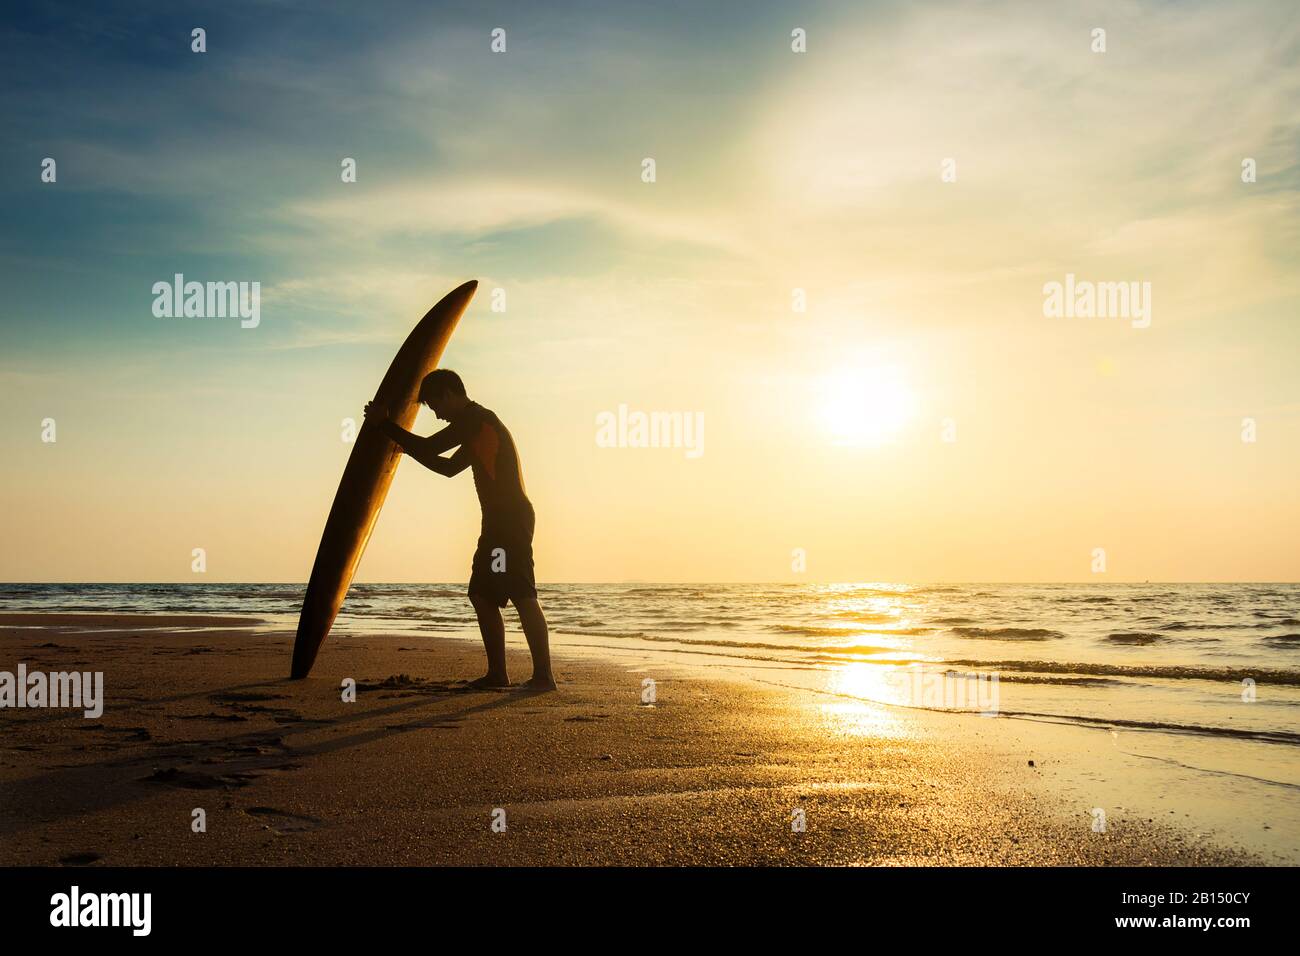 Surfing for water sport outdoor activity lifestyle concept. Silhouette of young happy surf man at white beach with surfboard. Surfer on the beach Stock Photo